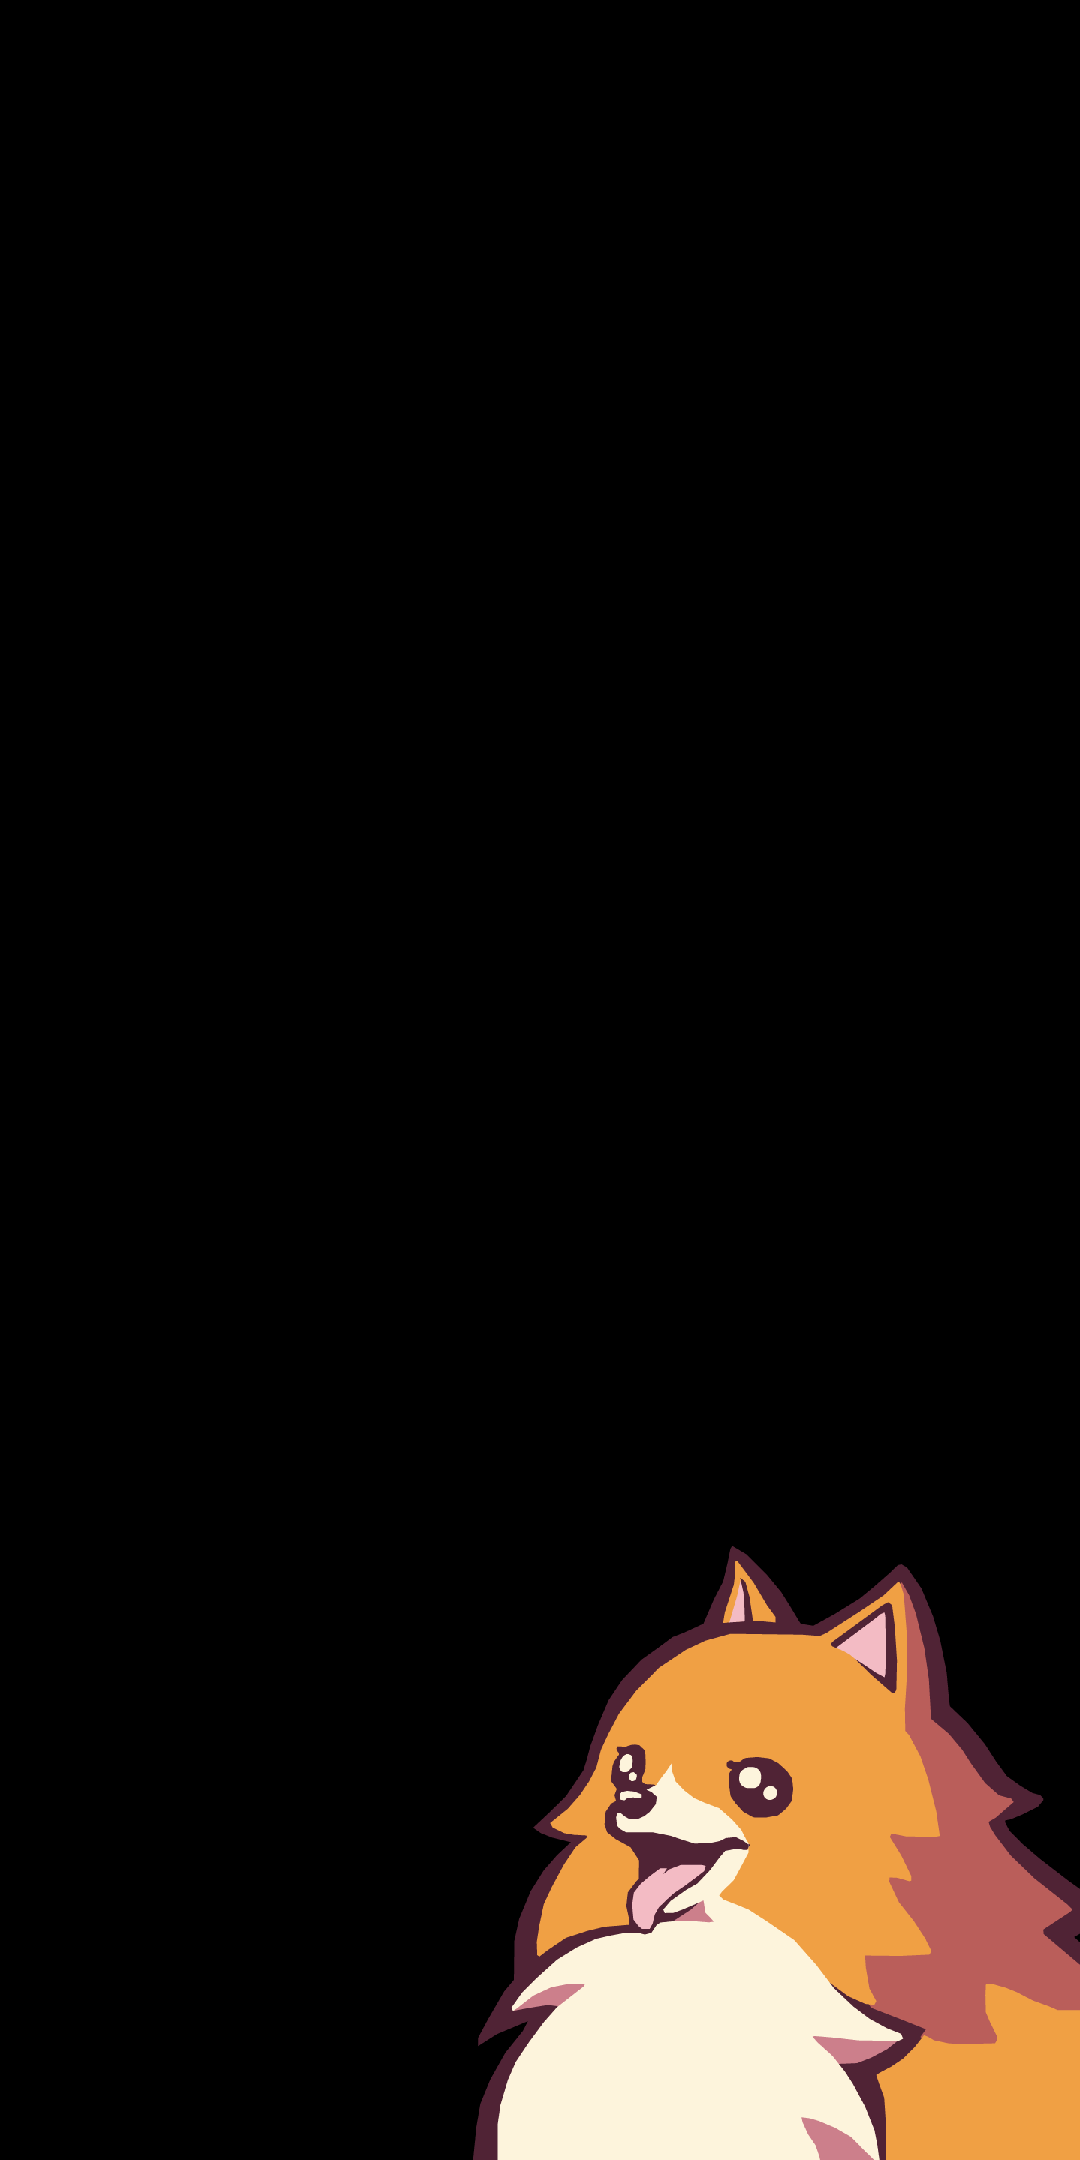 Made a simple phone wallpaper of this good boy from Ghost